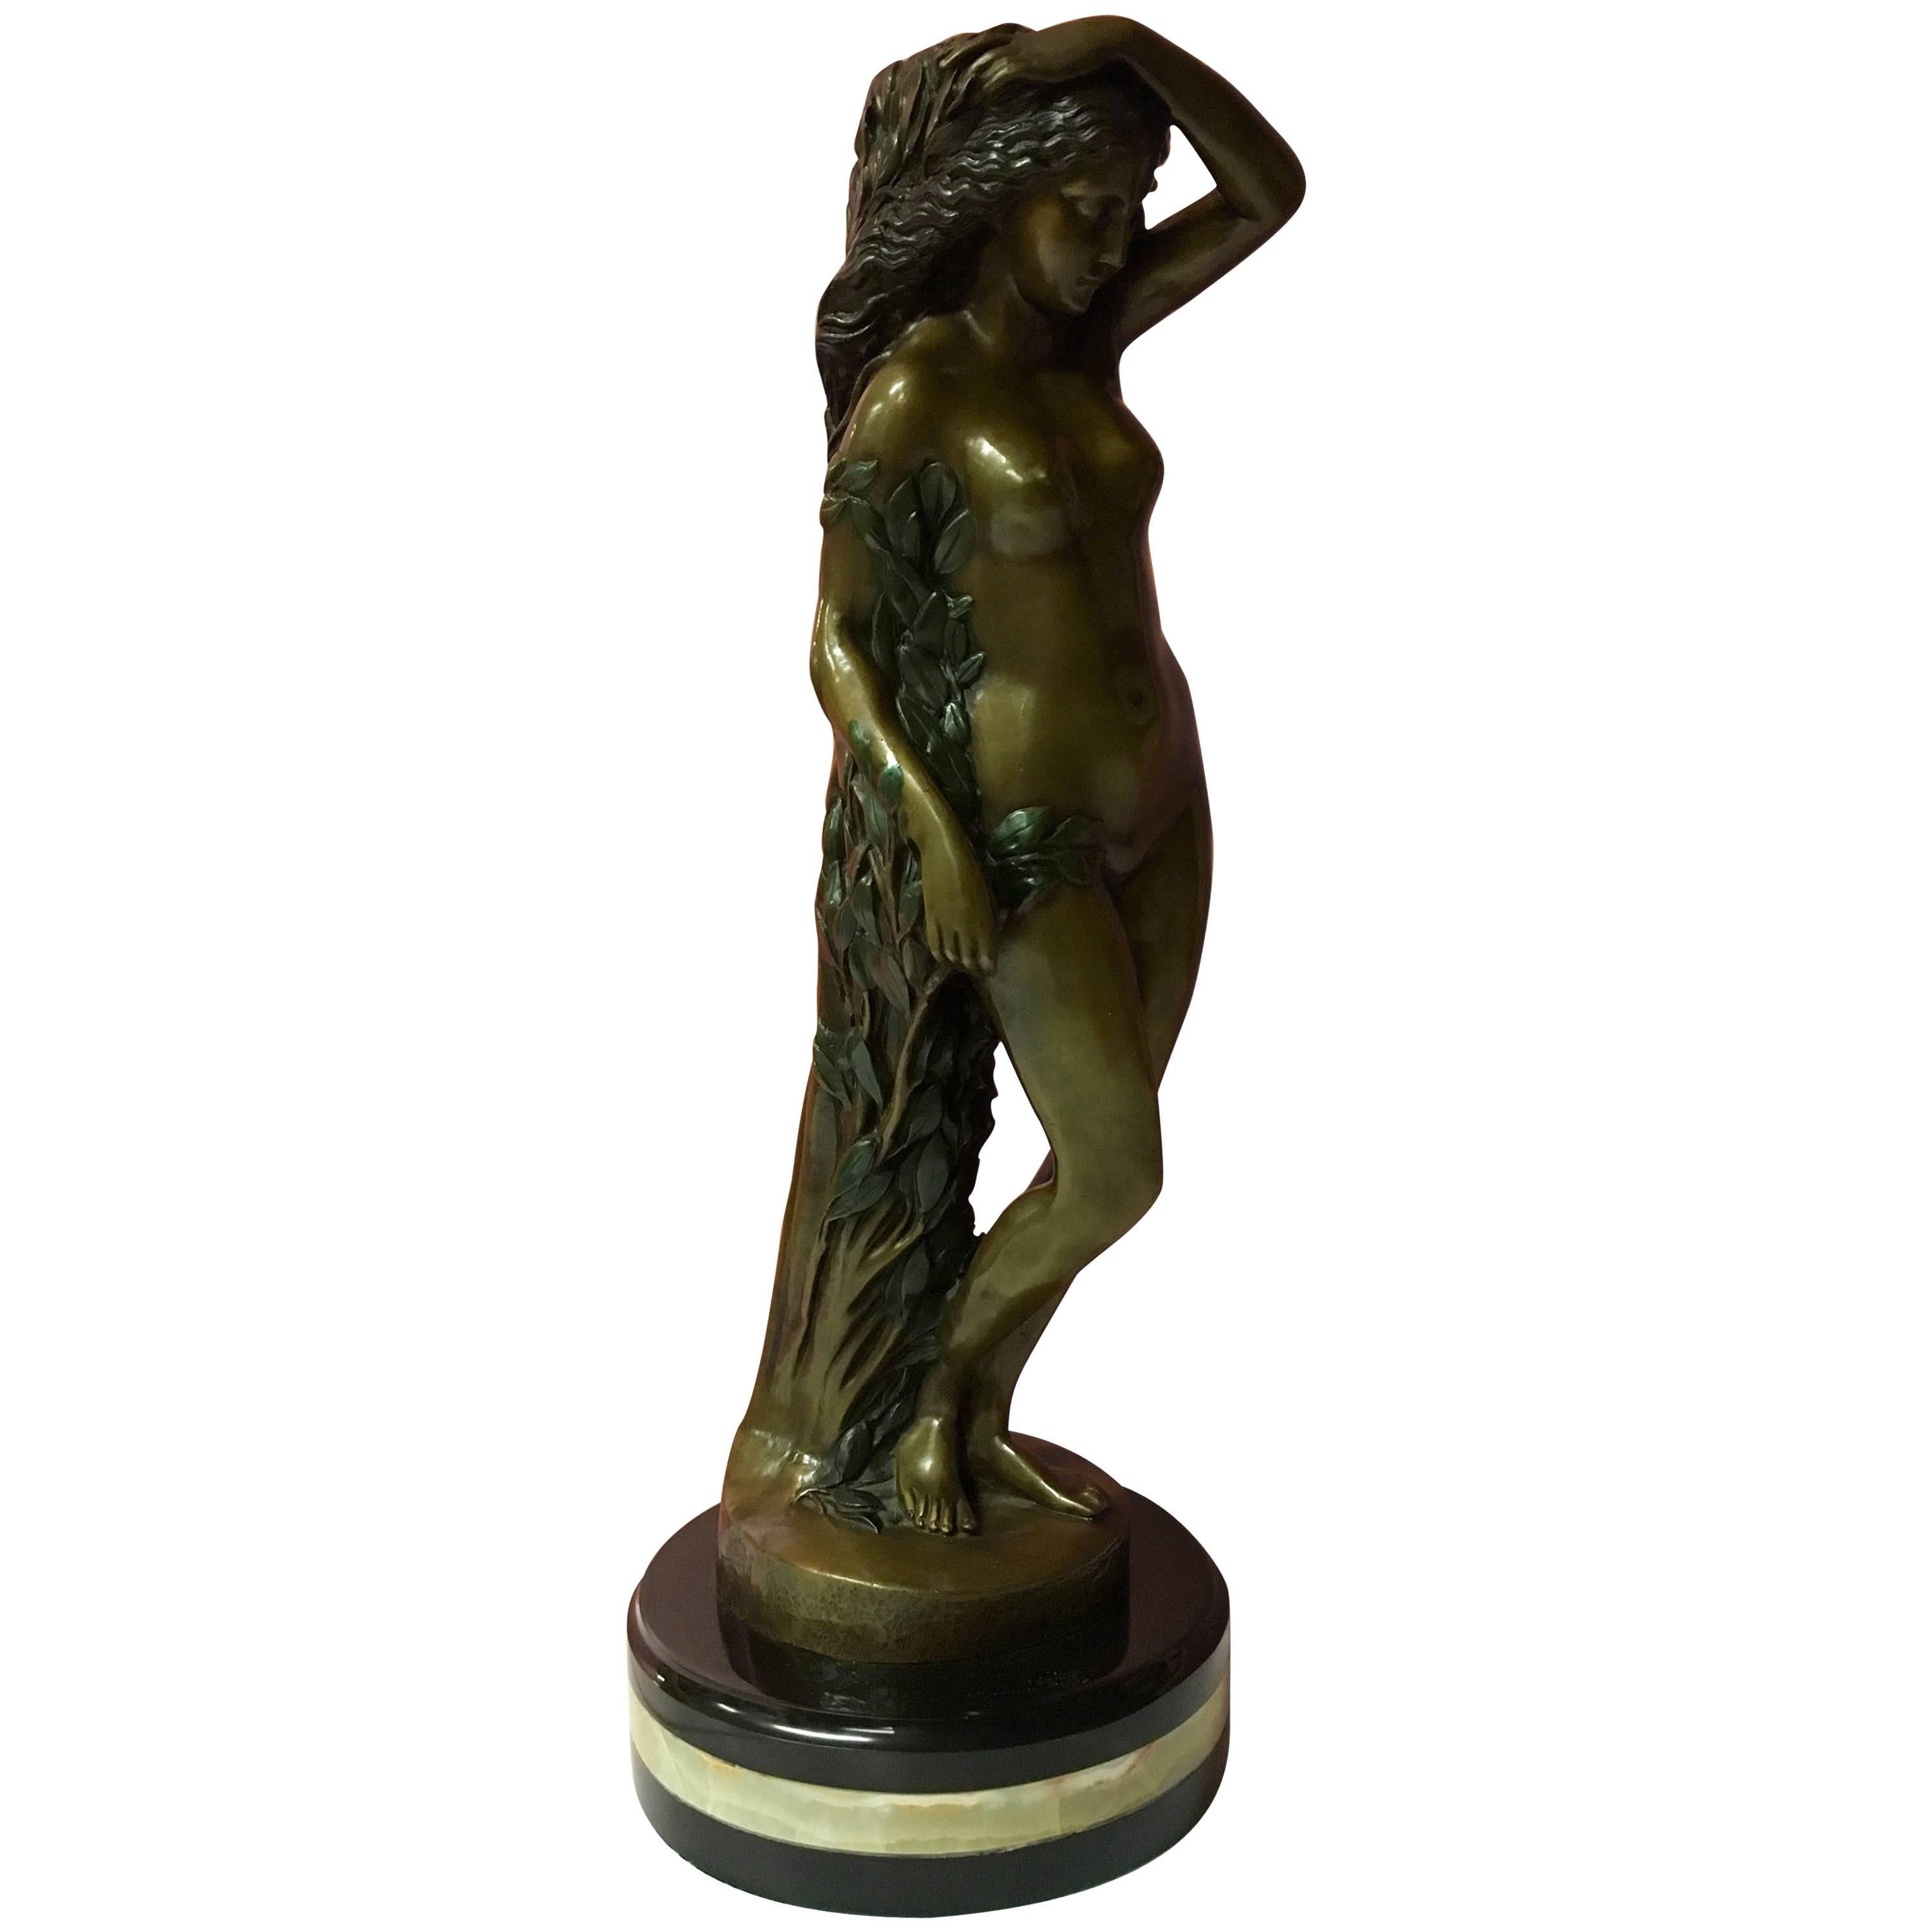 Tall Bronze and Marble Sculpture of a Nude Woman Entitled "The Vine" For Sale